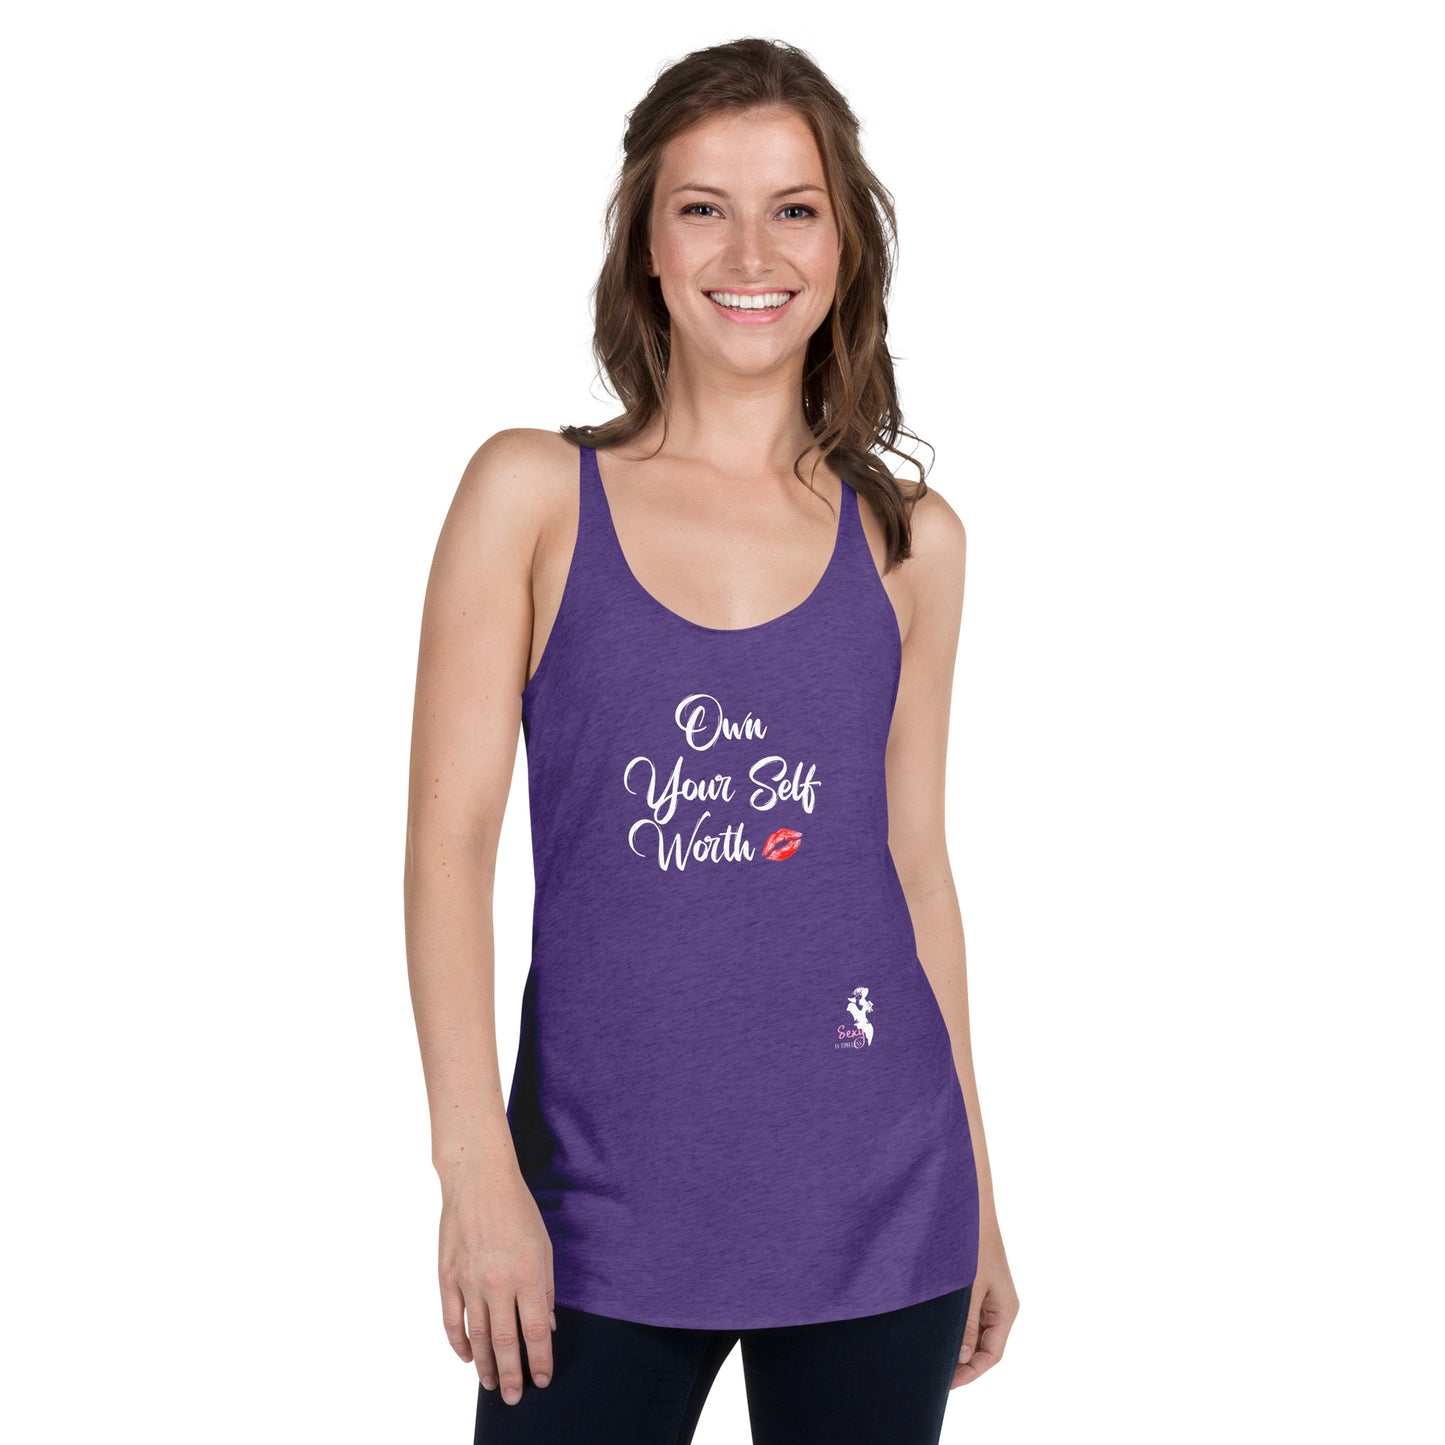 Women's Racerback Tank - Own your self worth - Colors